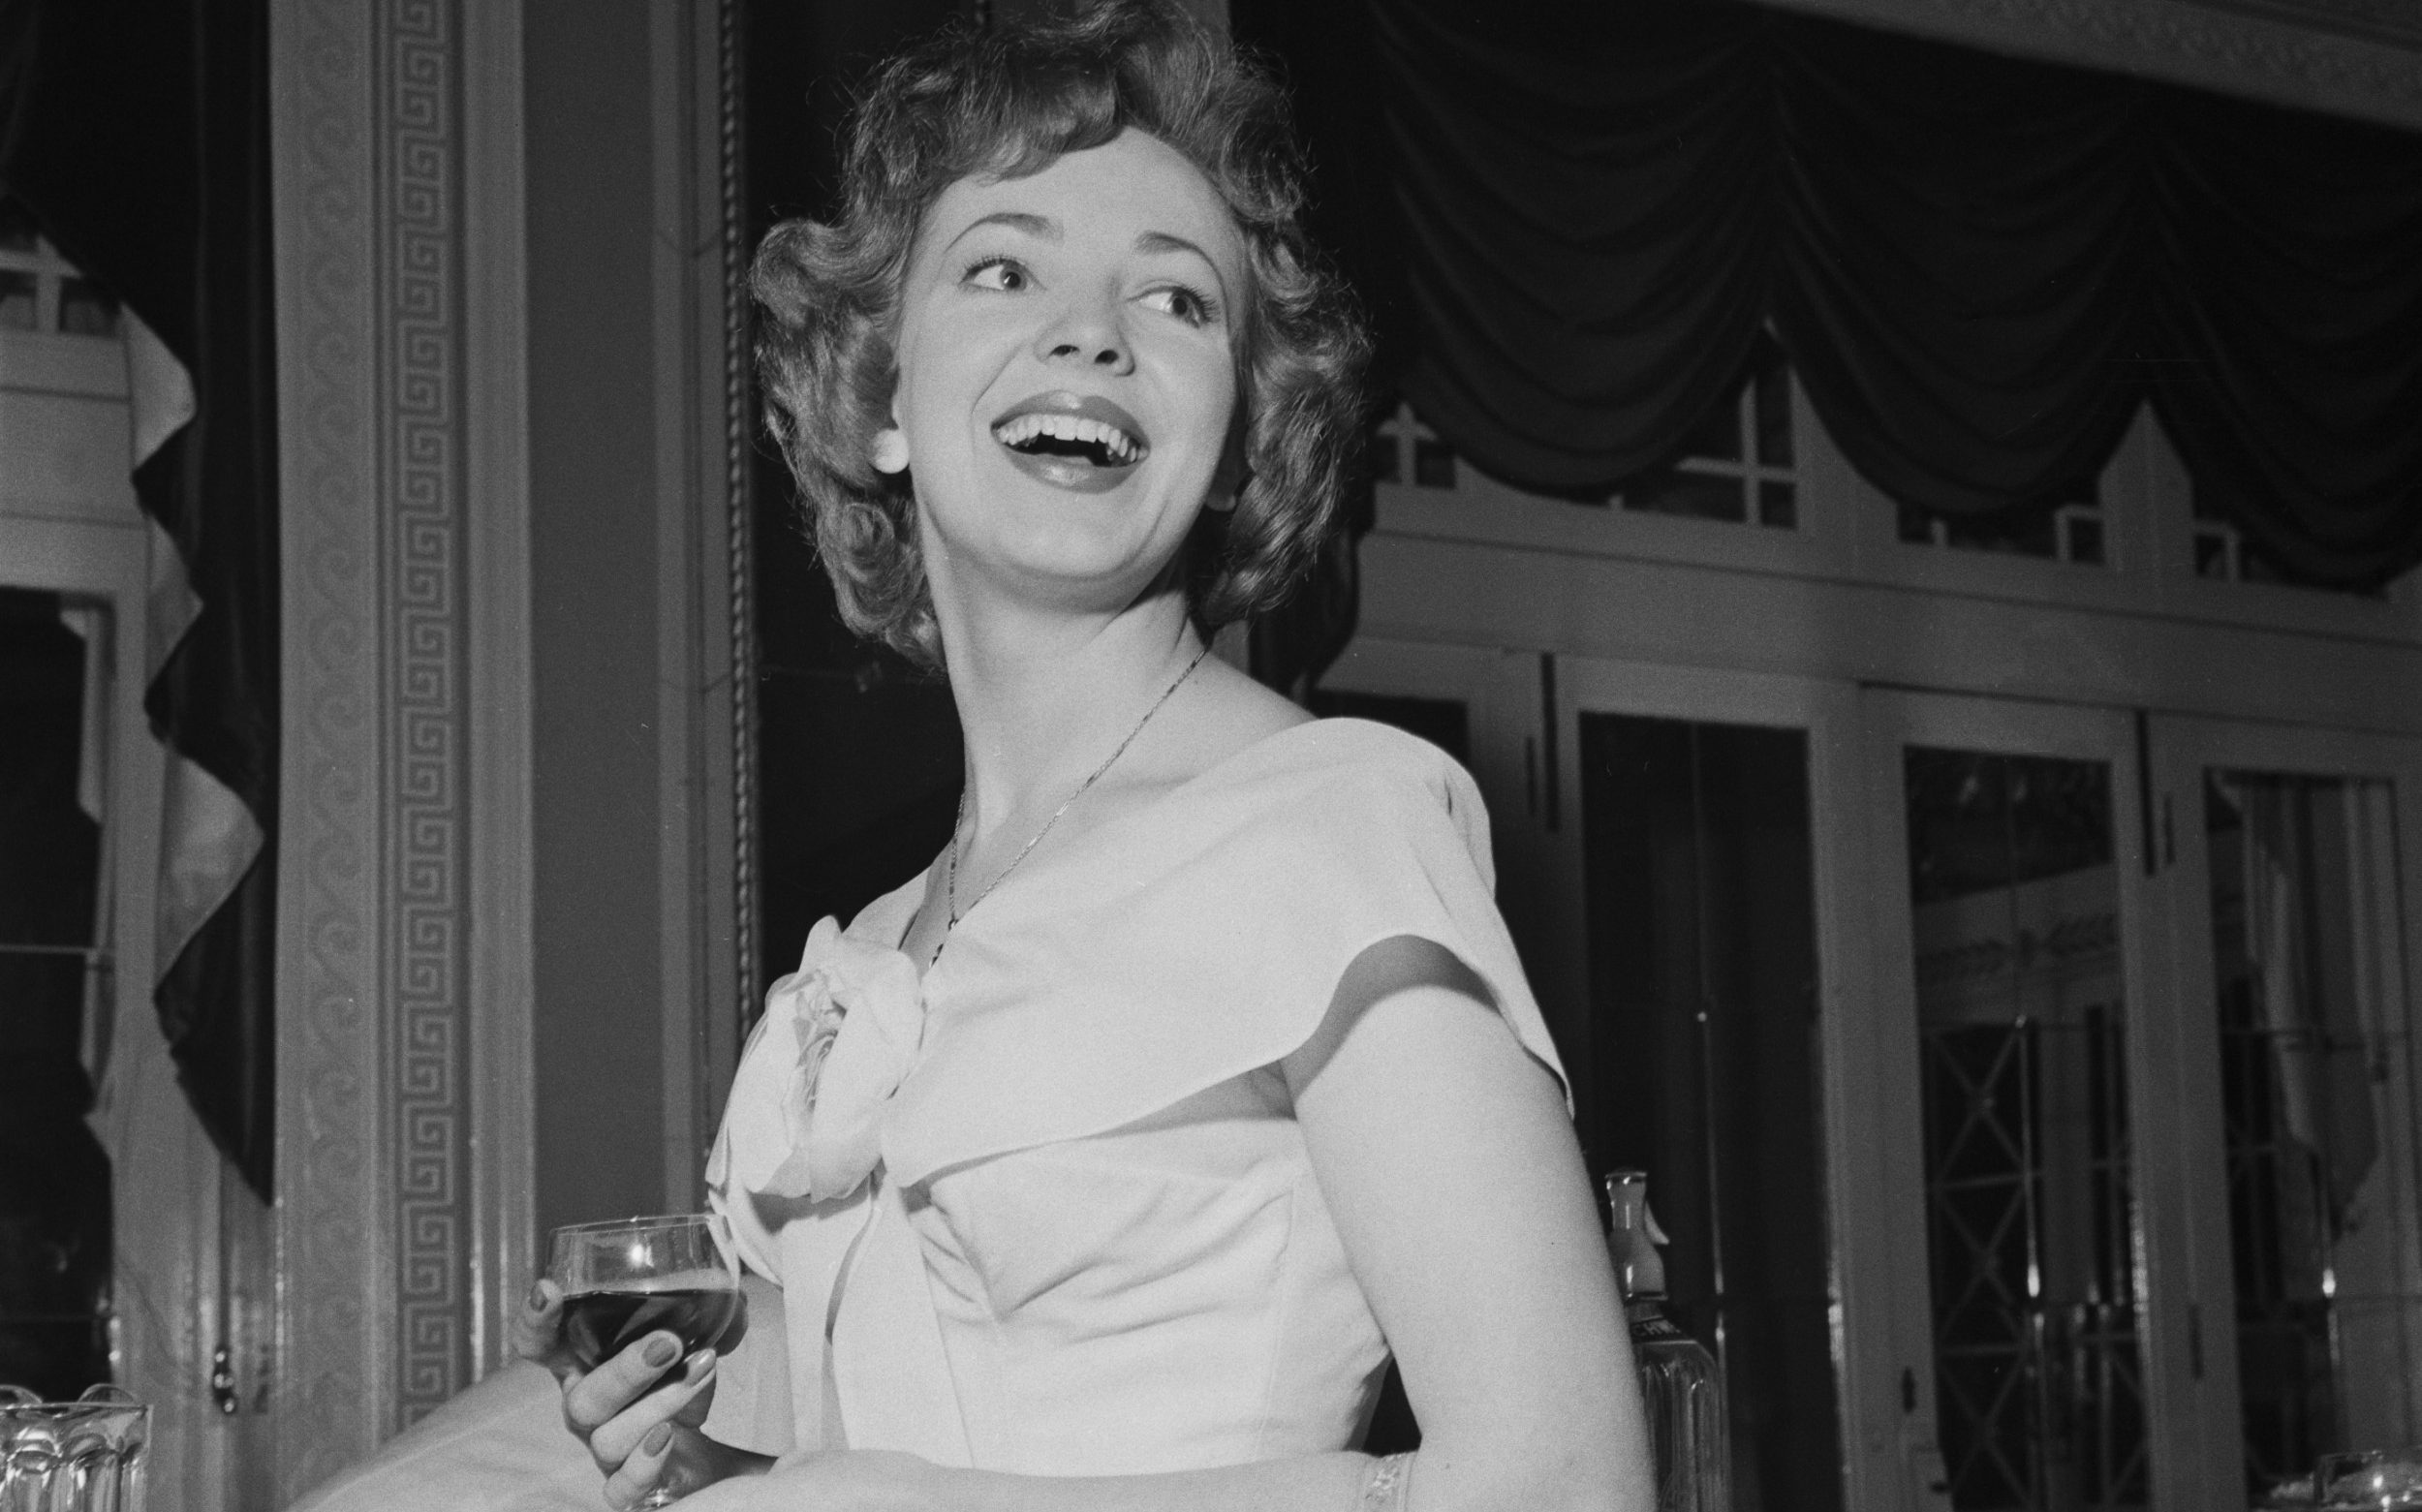 Patricia Braeden, the UK’s first actress, dies at the age of 88